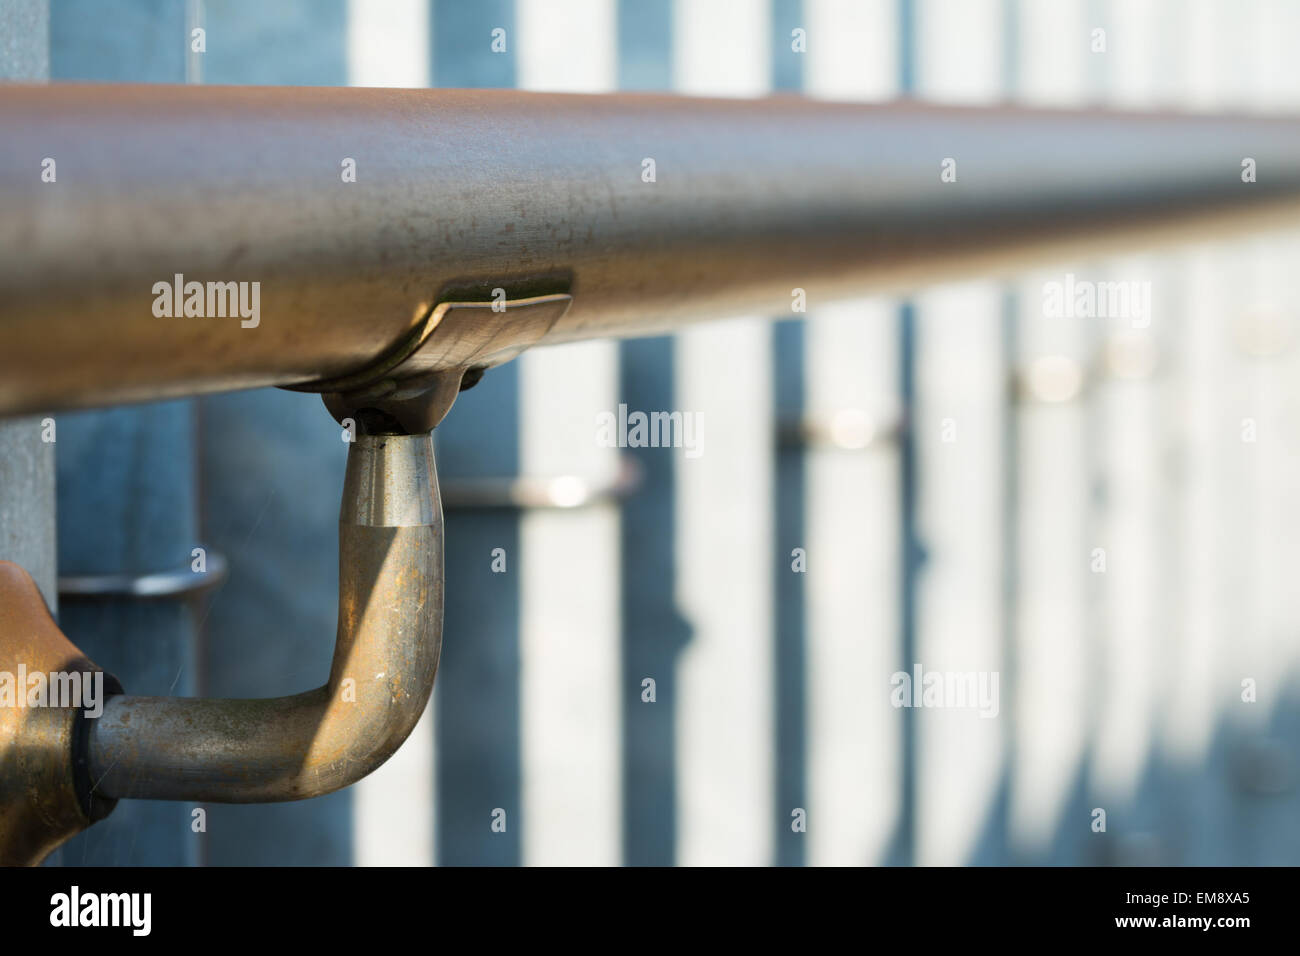 A metal railing on a metal fence with a shallow focus. Stock Photo